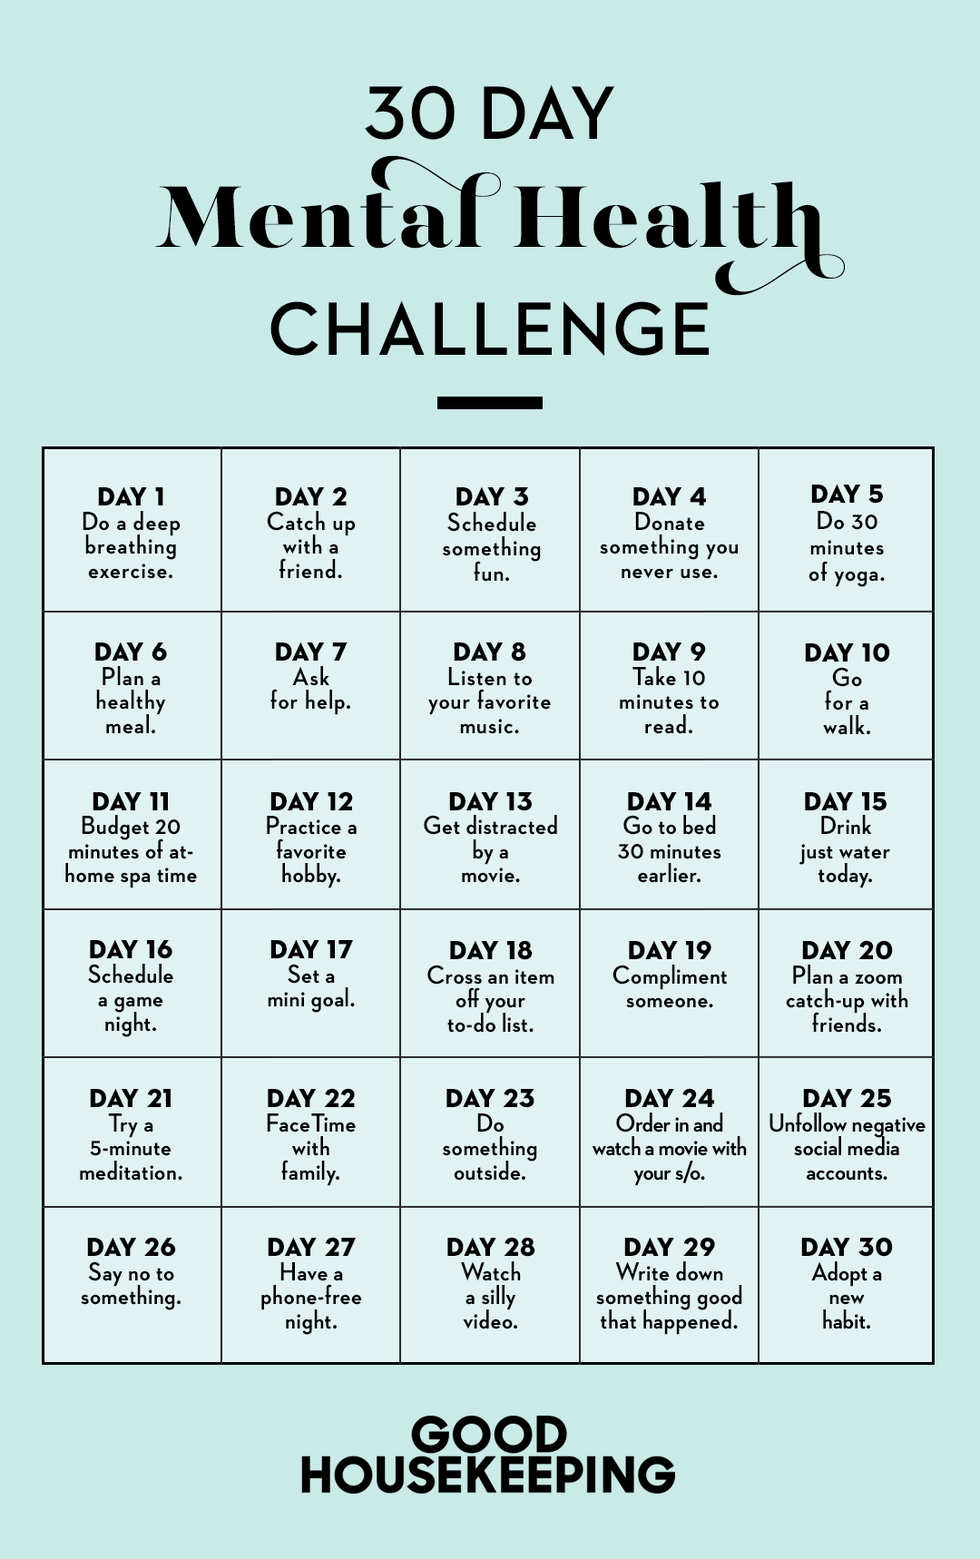 the 30 day mental health challenge